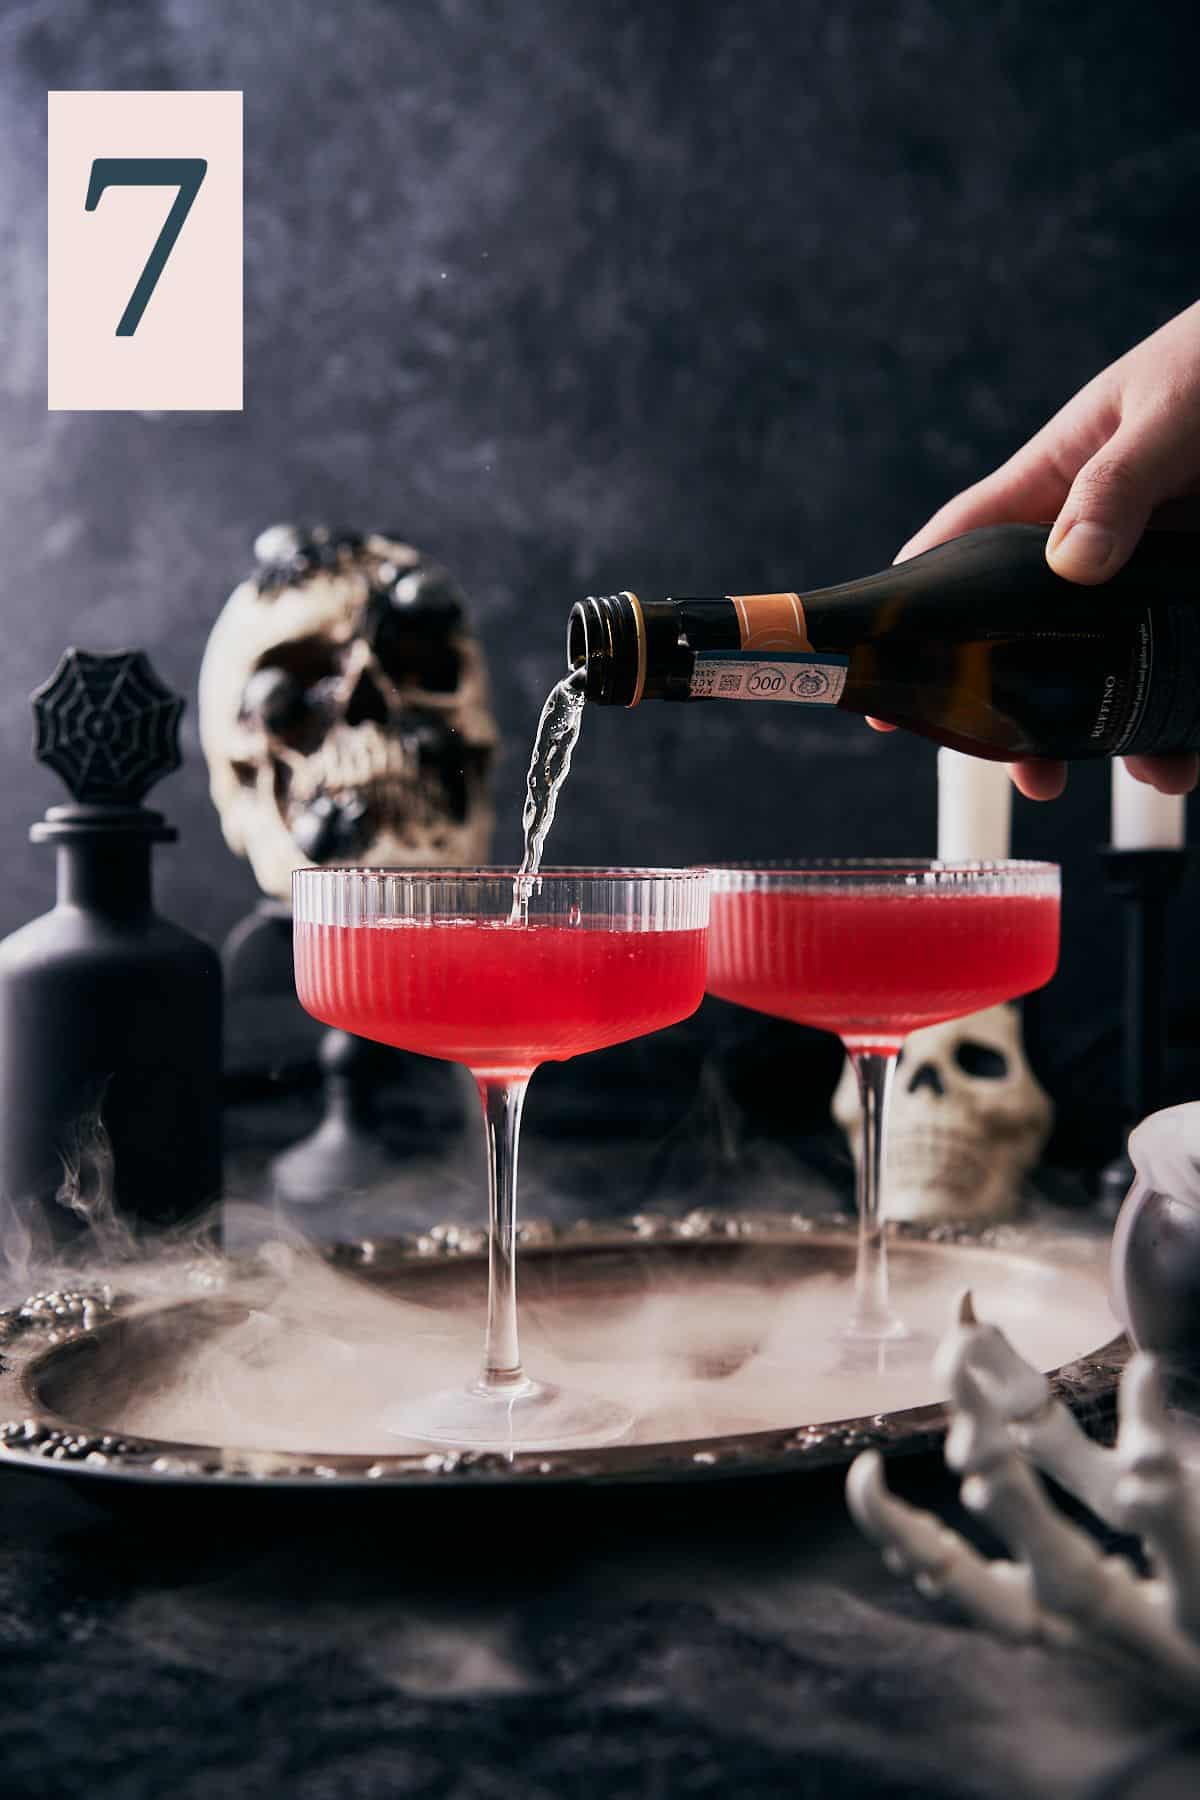 hand pouring sparkling wine into coupe glasses with red liquid inside, on a spooky dark halloween scene with skulls and dry ice.